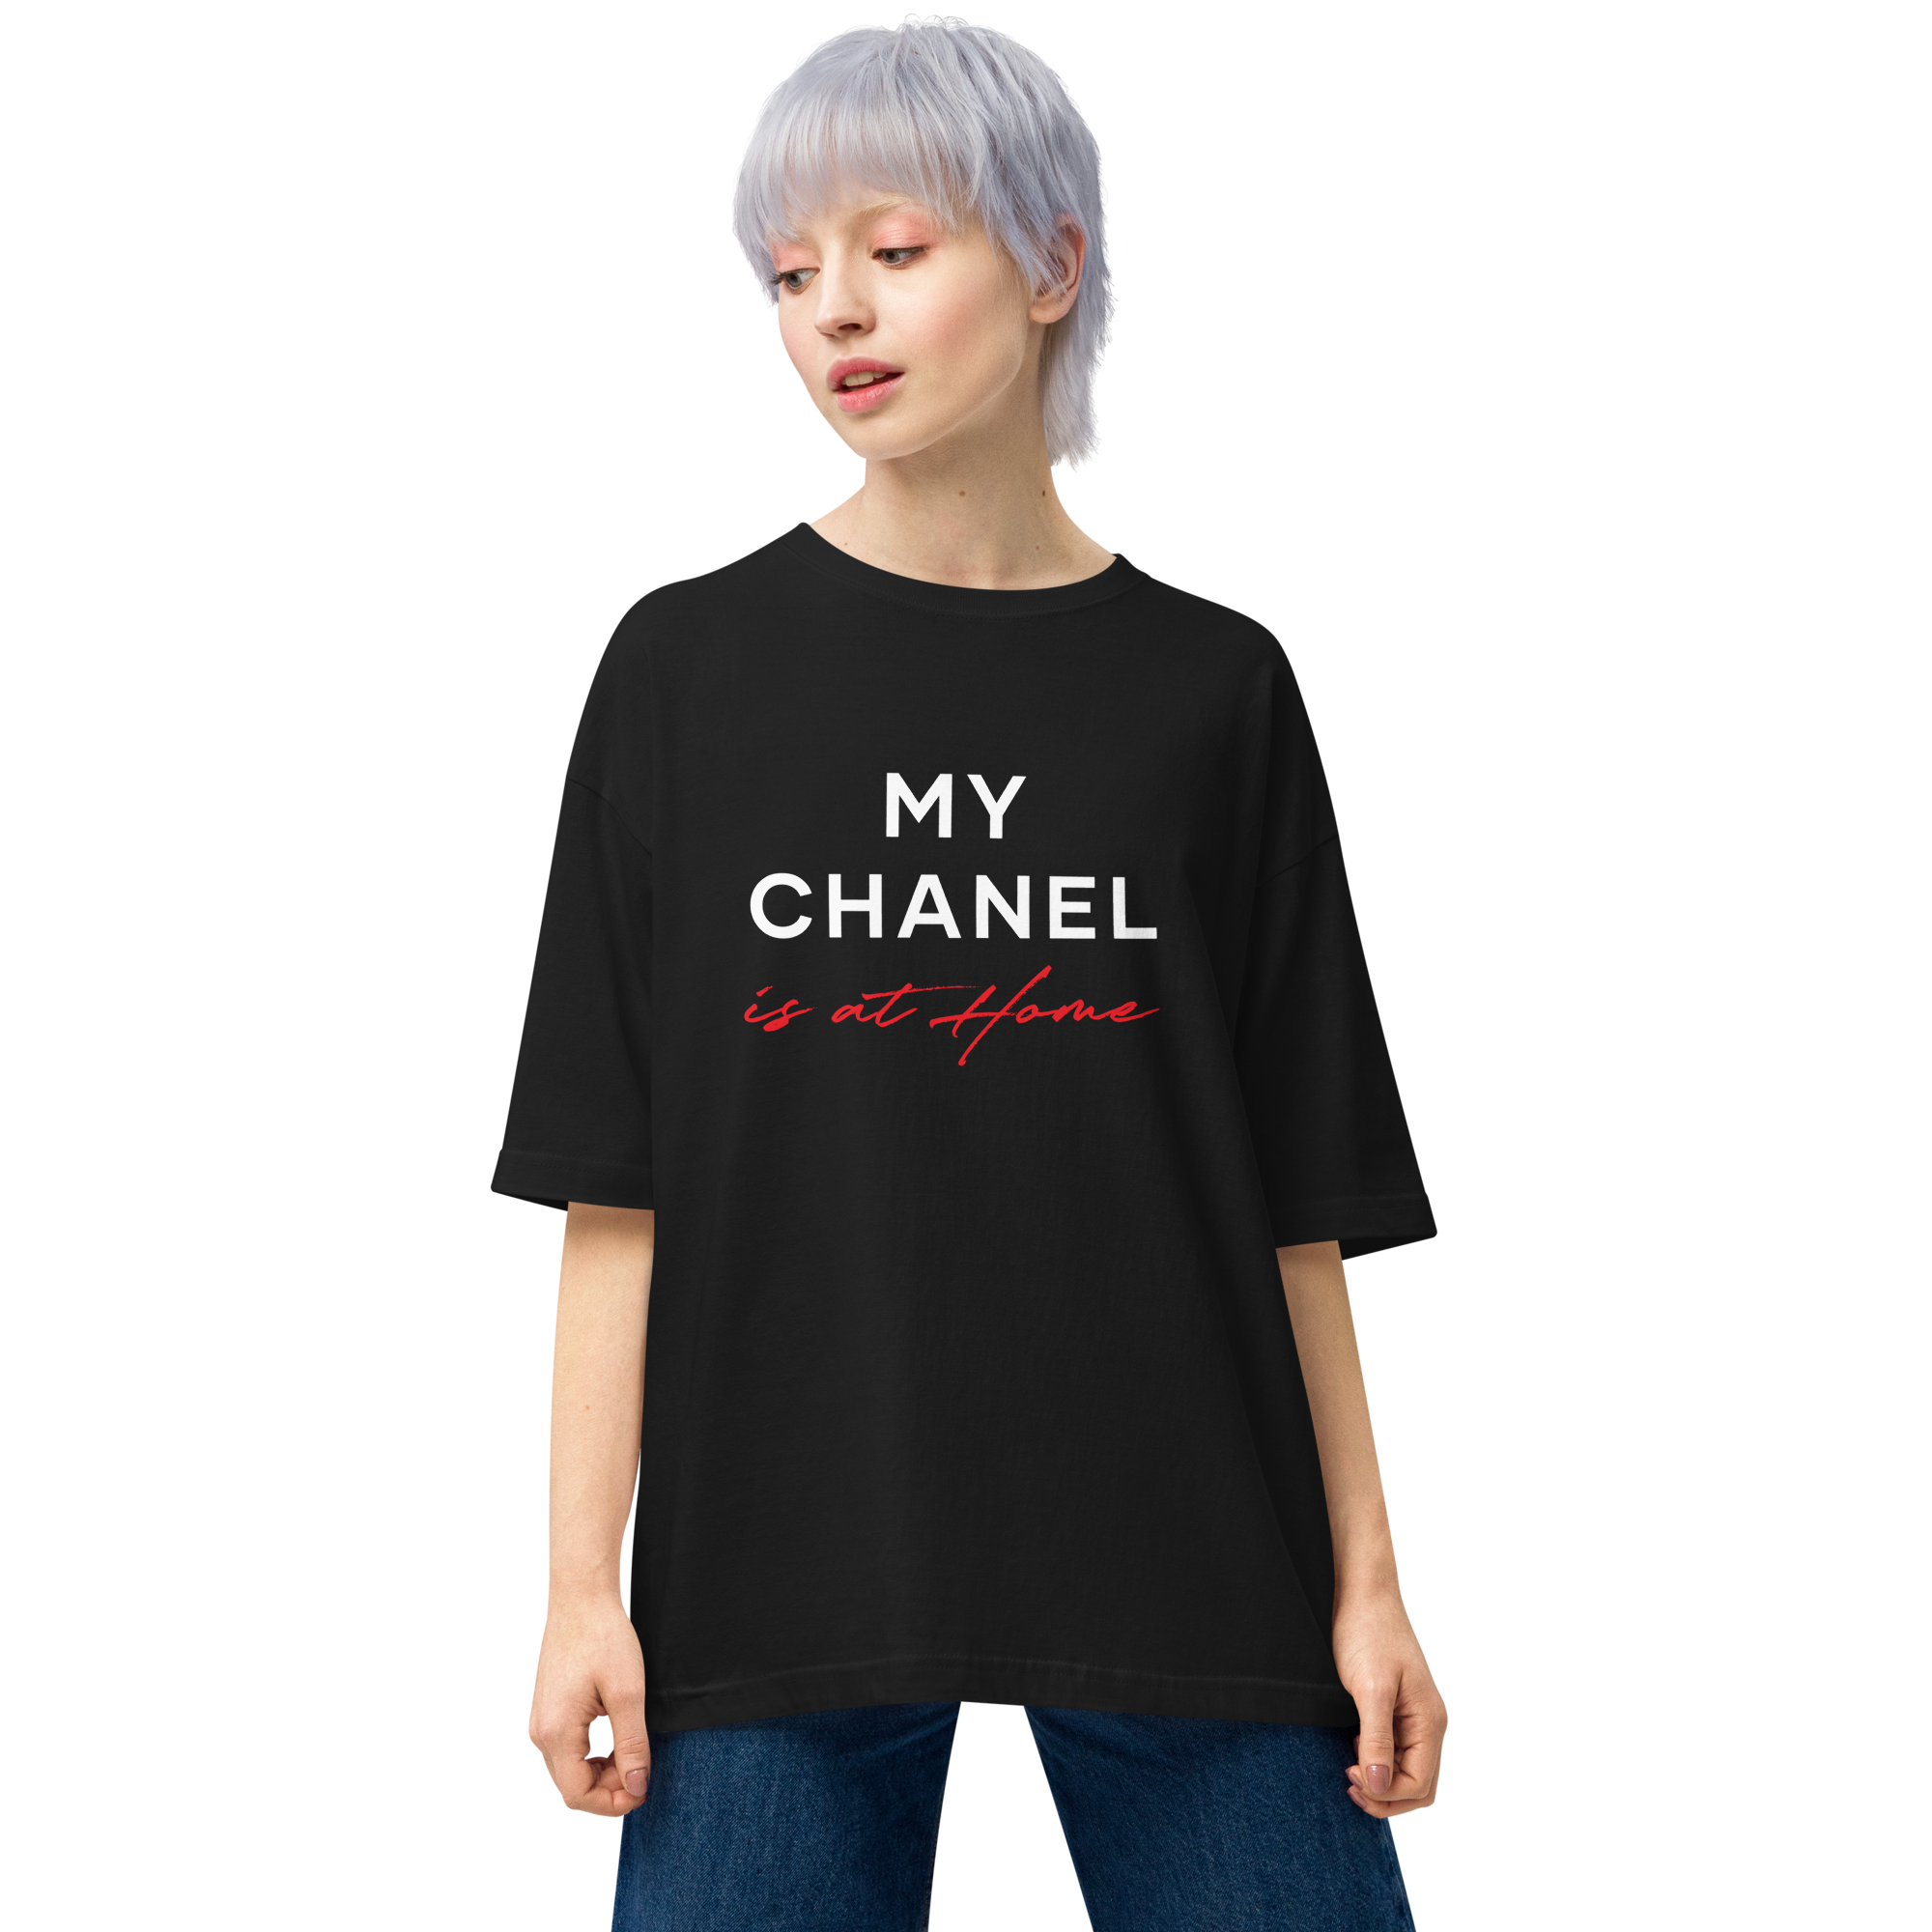 Design Express My Chanel Is at Home Oversized T-Shirt